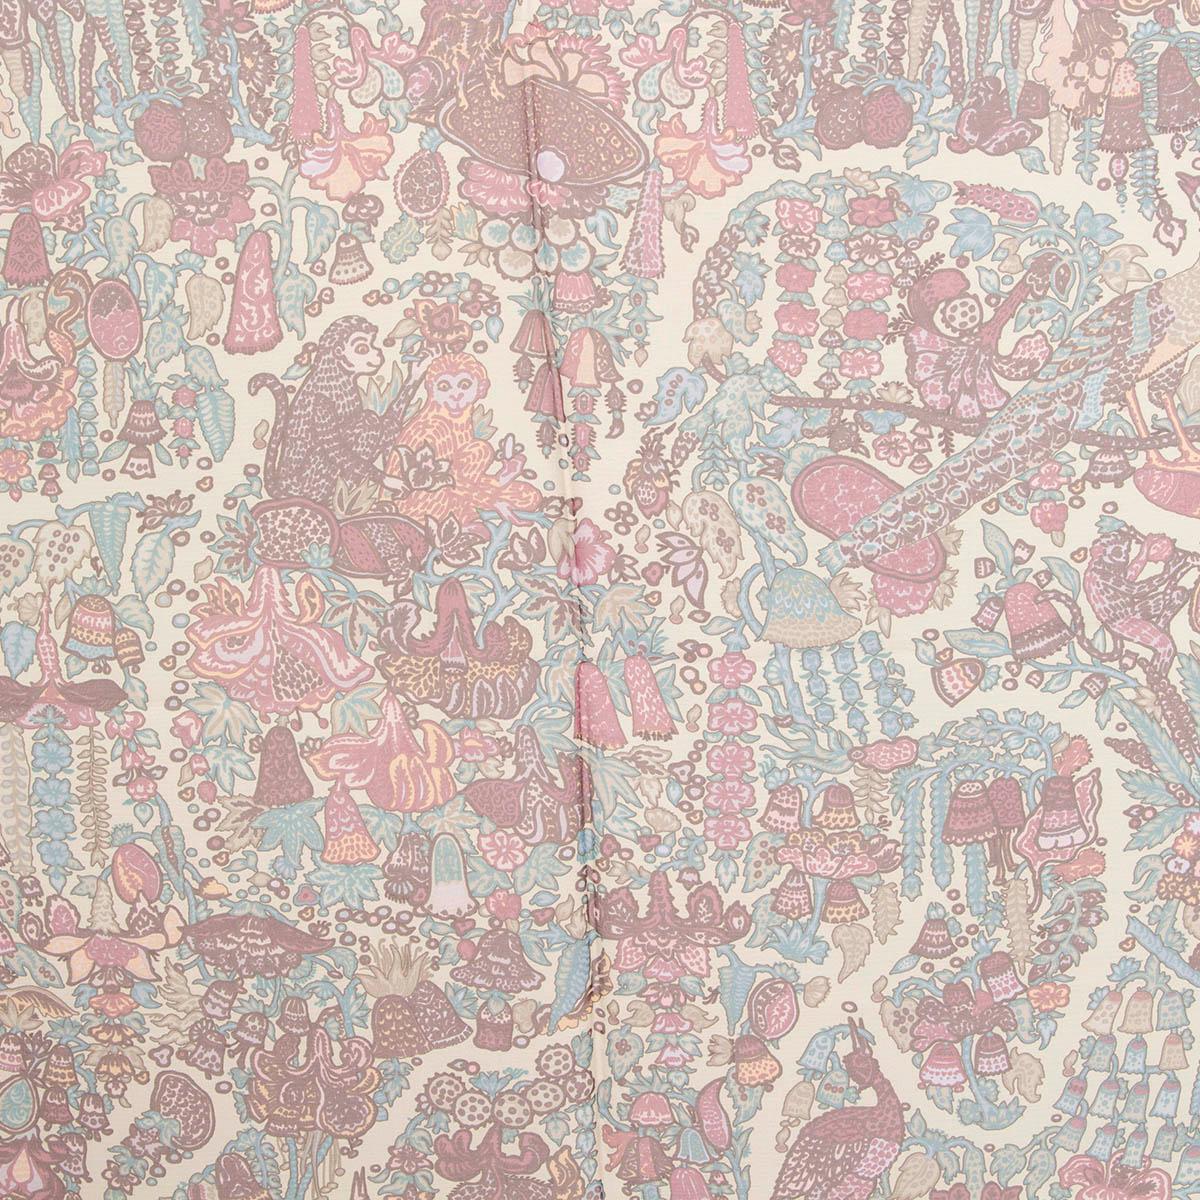 100% authentic Hermès 140 Legende Moghole Mousseline silk (100%) chiffon scarf circa 2008 features an elaborate design of florals and animals on a background of sand with details in turquoise, lilac, pale yellow, light grey and purple. Has been worn